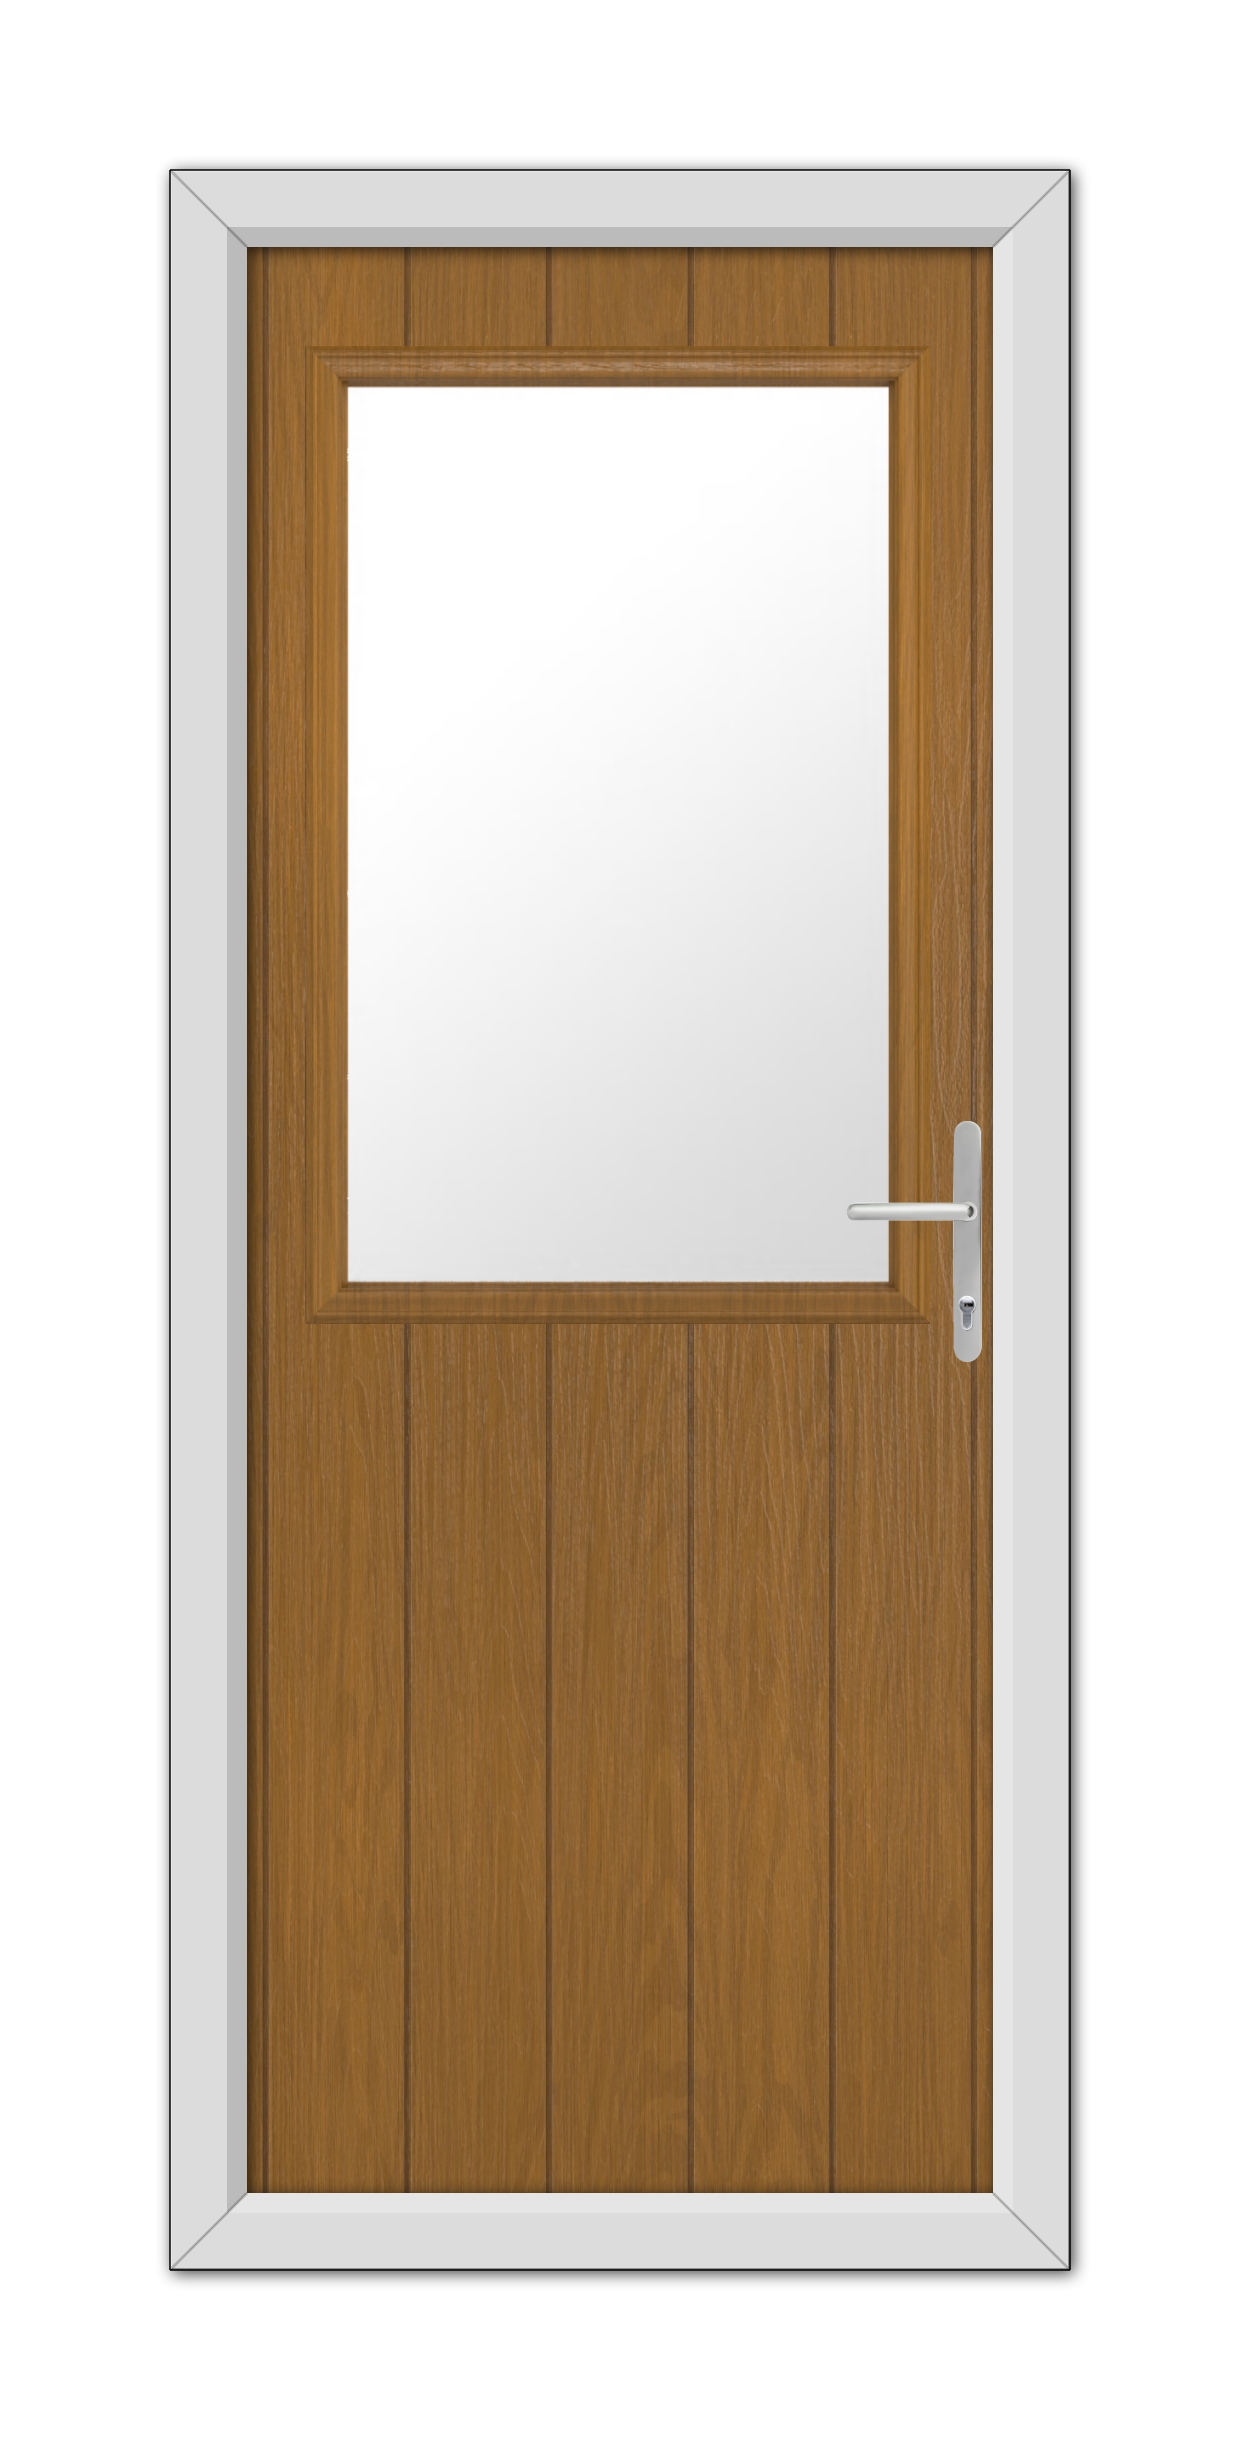 A Oak Clifton Composite Door 48mm Timber Core with a white frame featuring a centered glass window and a metal handle, isolated on a white background.